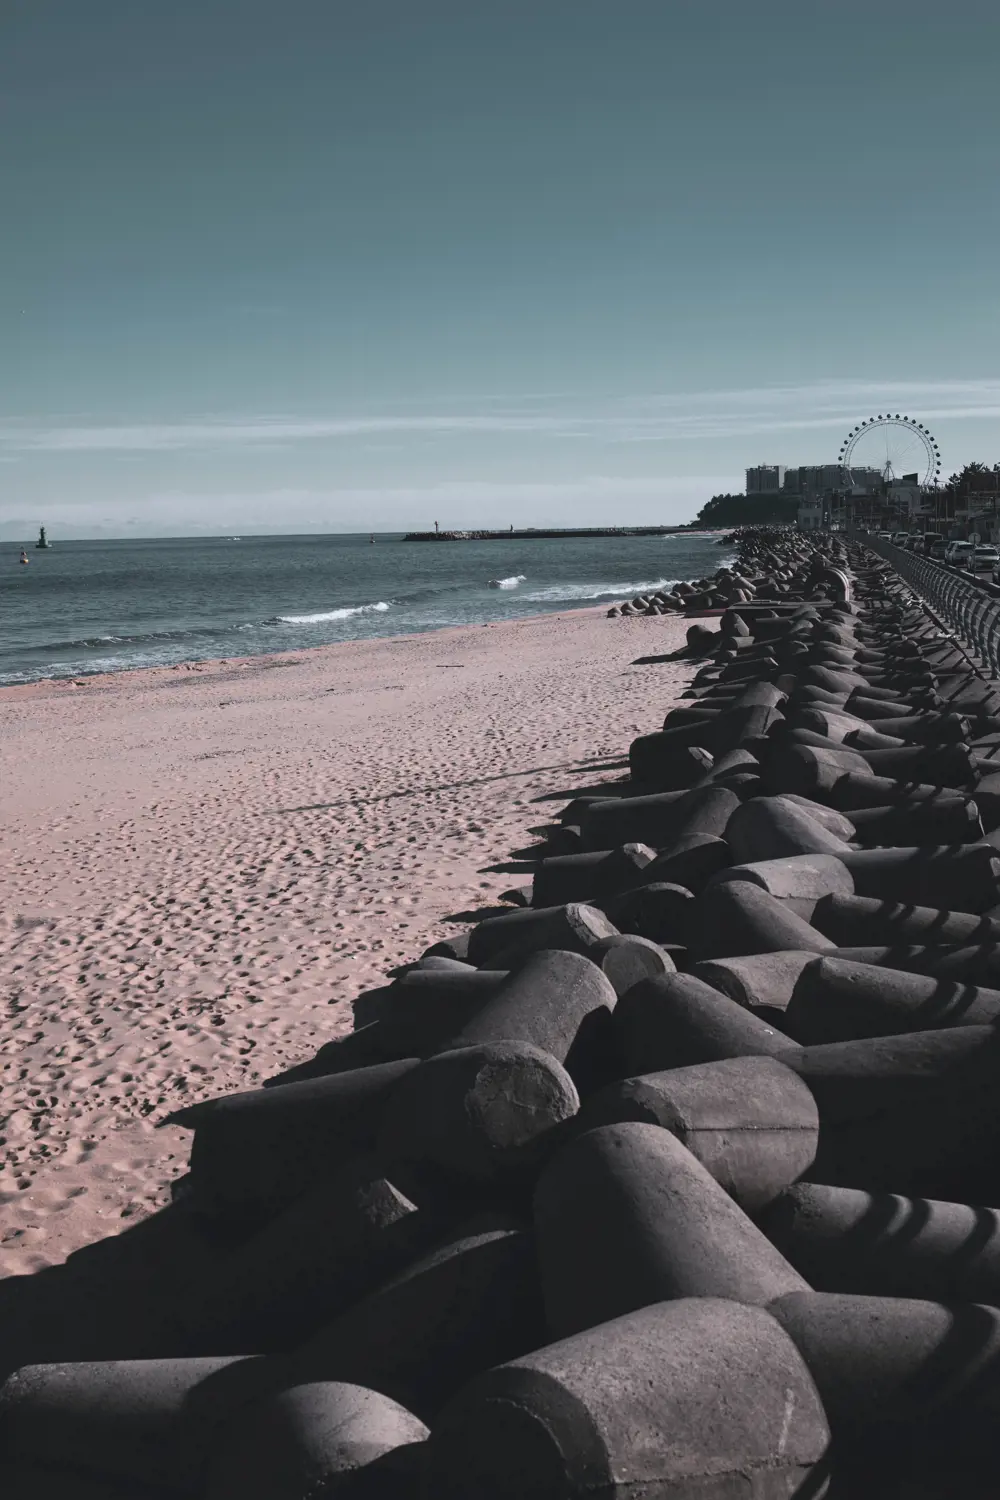 An array of concrete tetrapods on a beach, stretching into the distance.